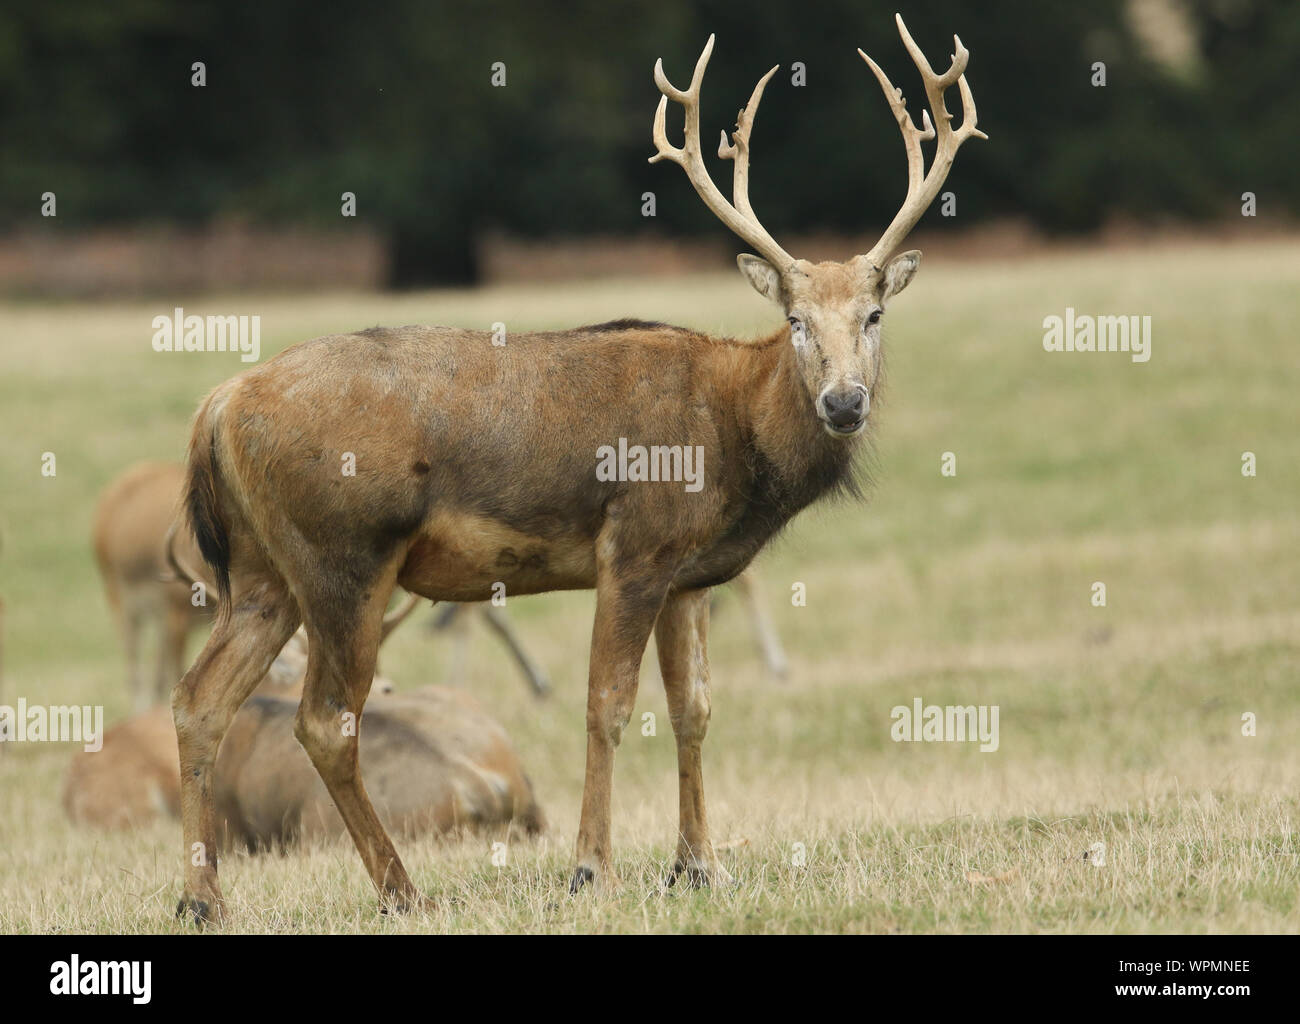 A magnificent stag Milu Deer, also known as Pére David's, Elaphurus davidianus, feeding in a meadow. Stock Photo